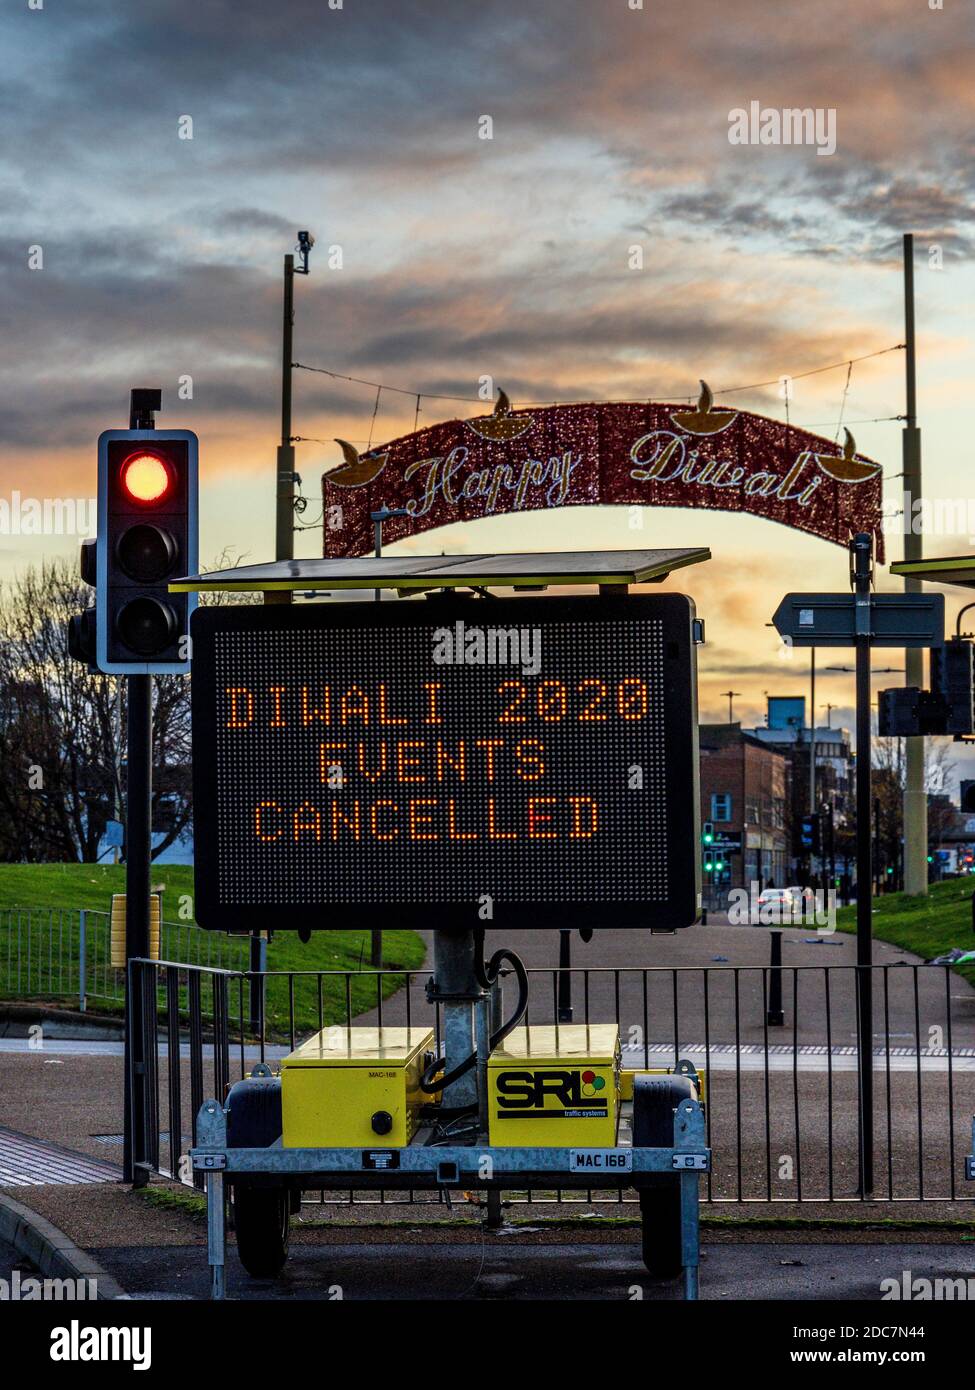 Diwali 2020 events cancelled in Leicester due to the coronavirus Covid-19 pandemic. Stock Photo